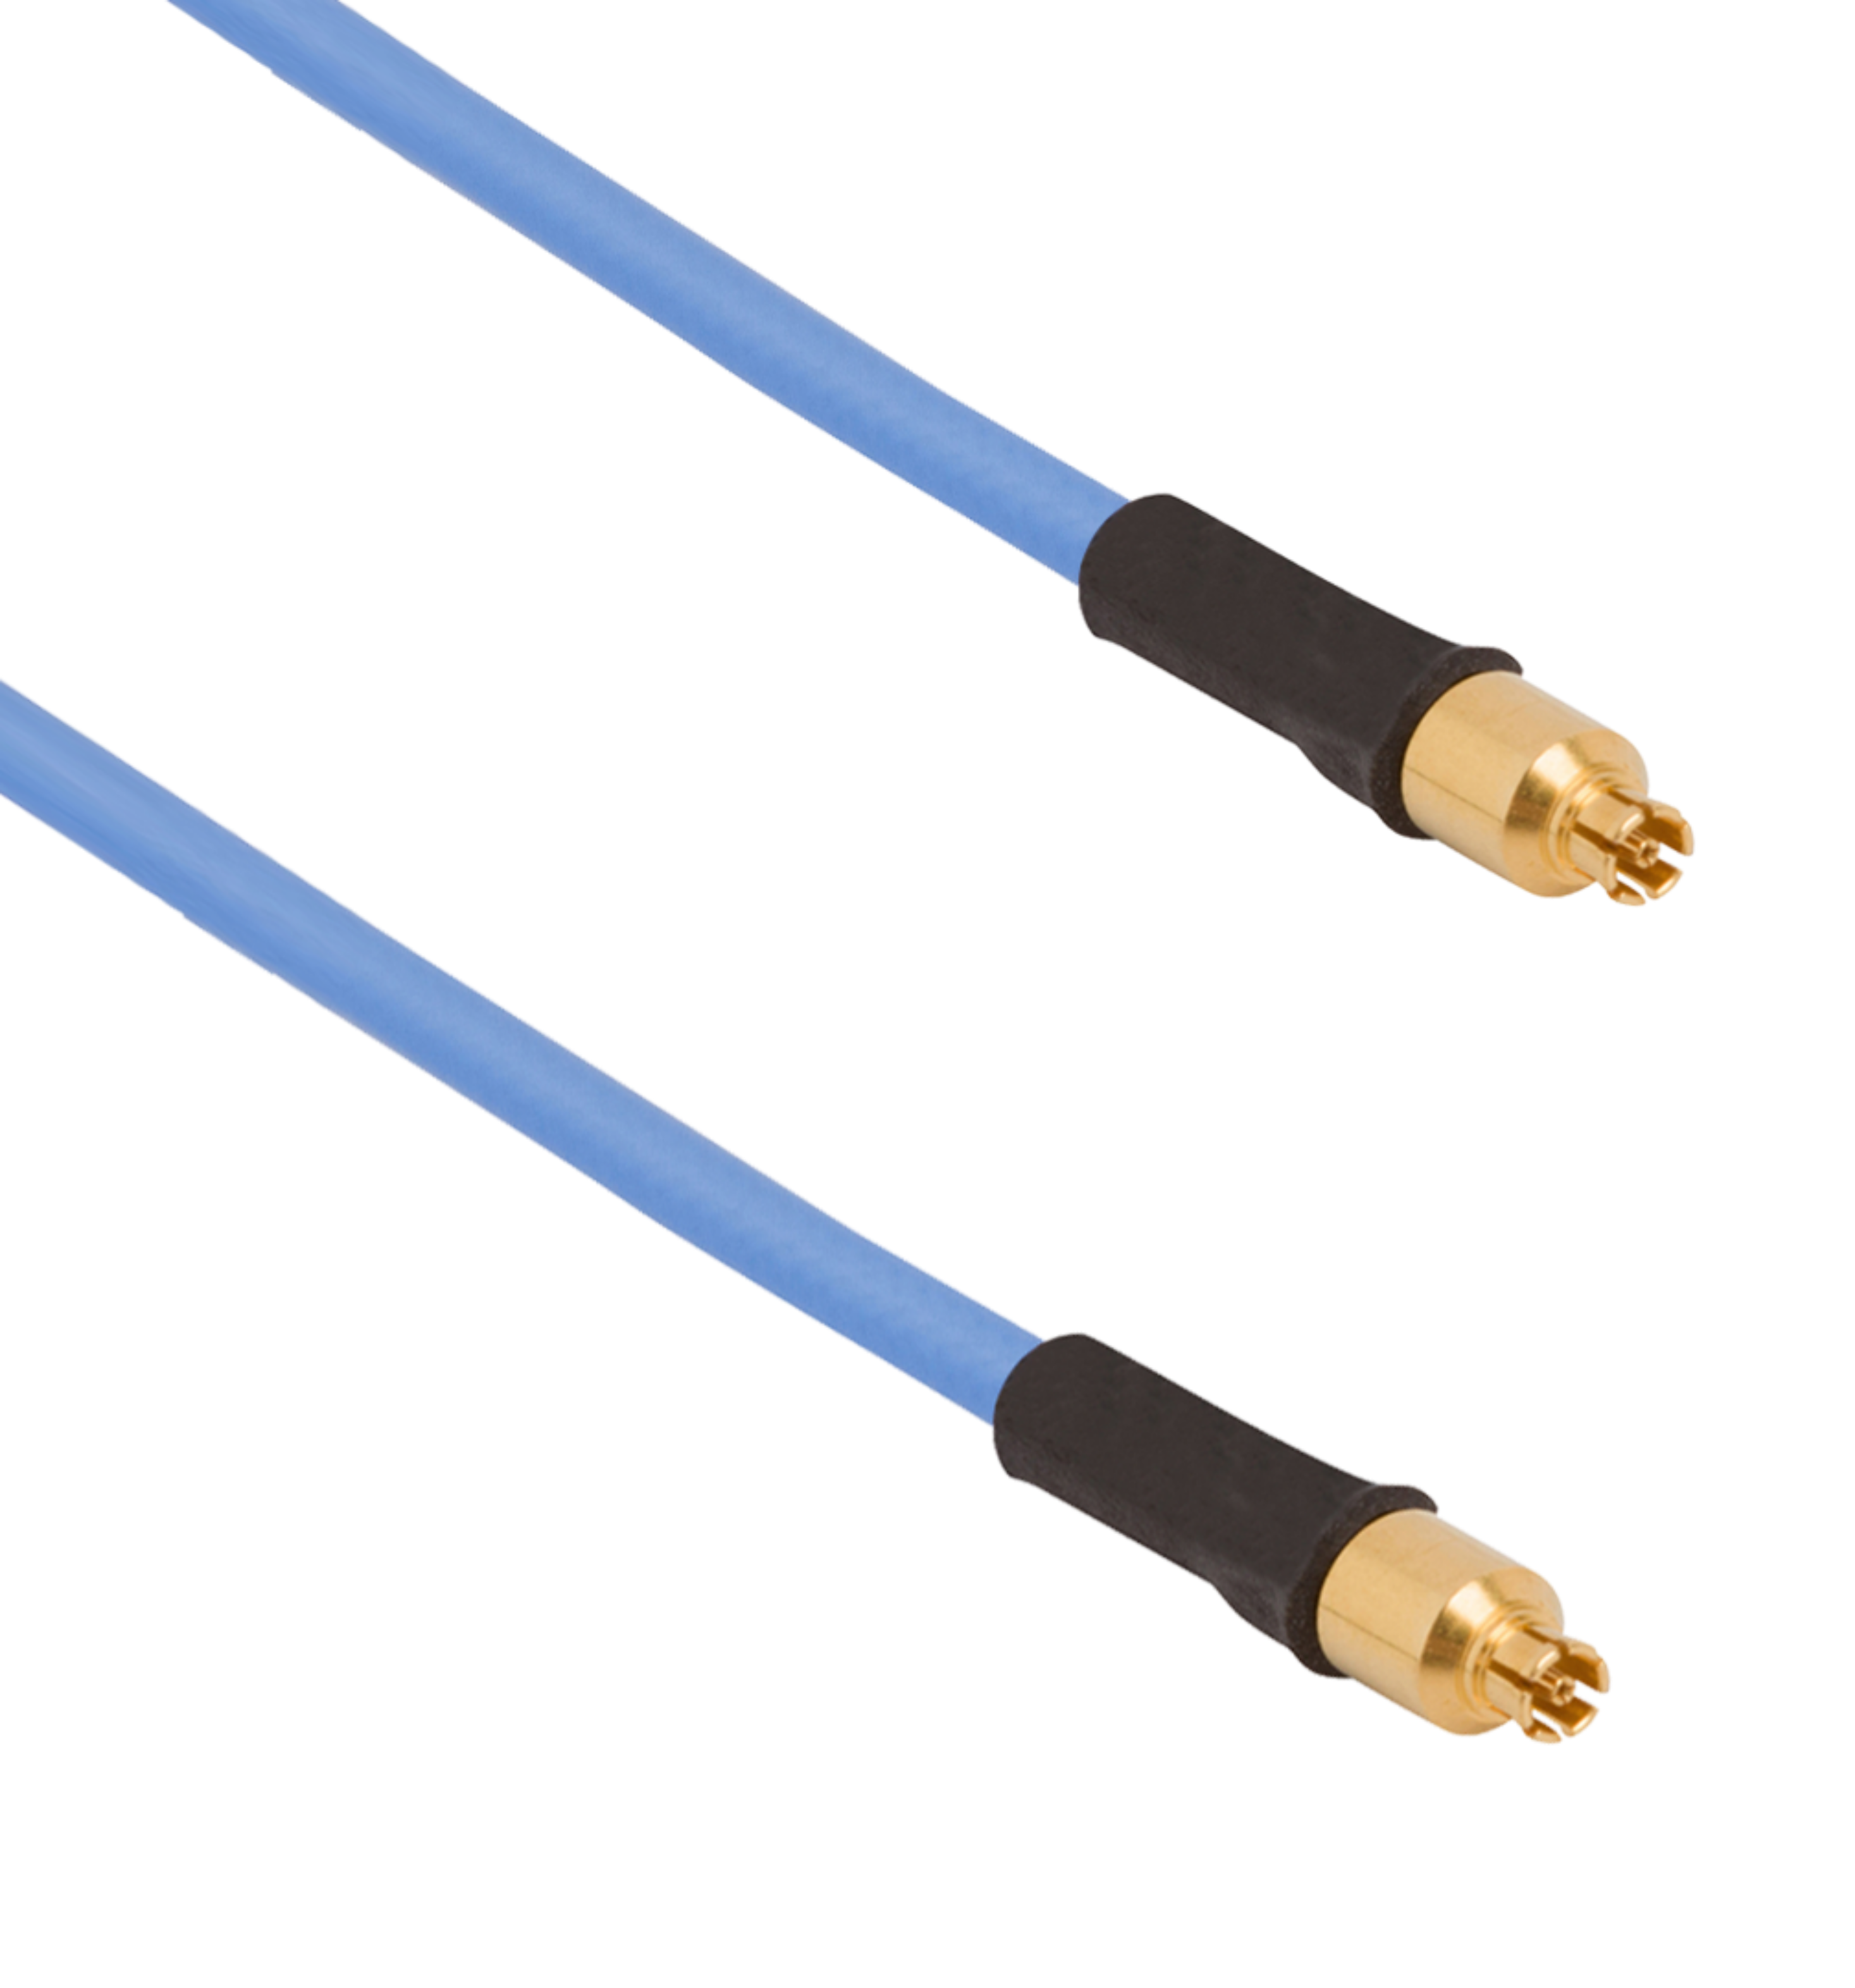 Picture of SMPS Female to SMPS Female 6" Cable Assembly for .047 Cable